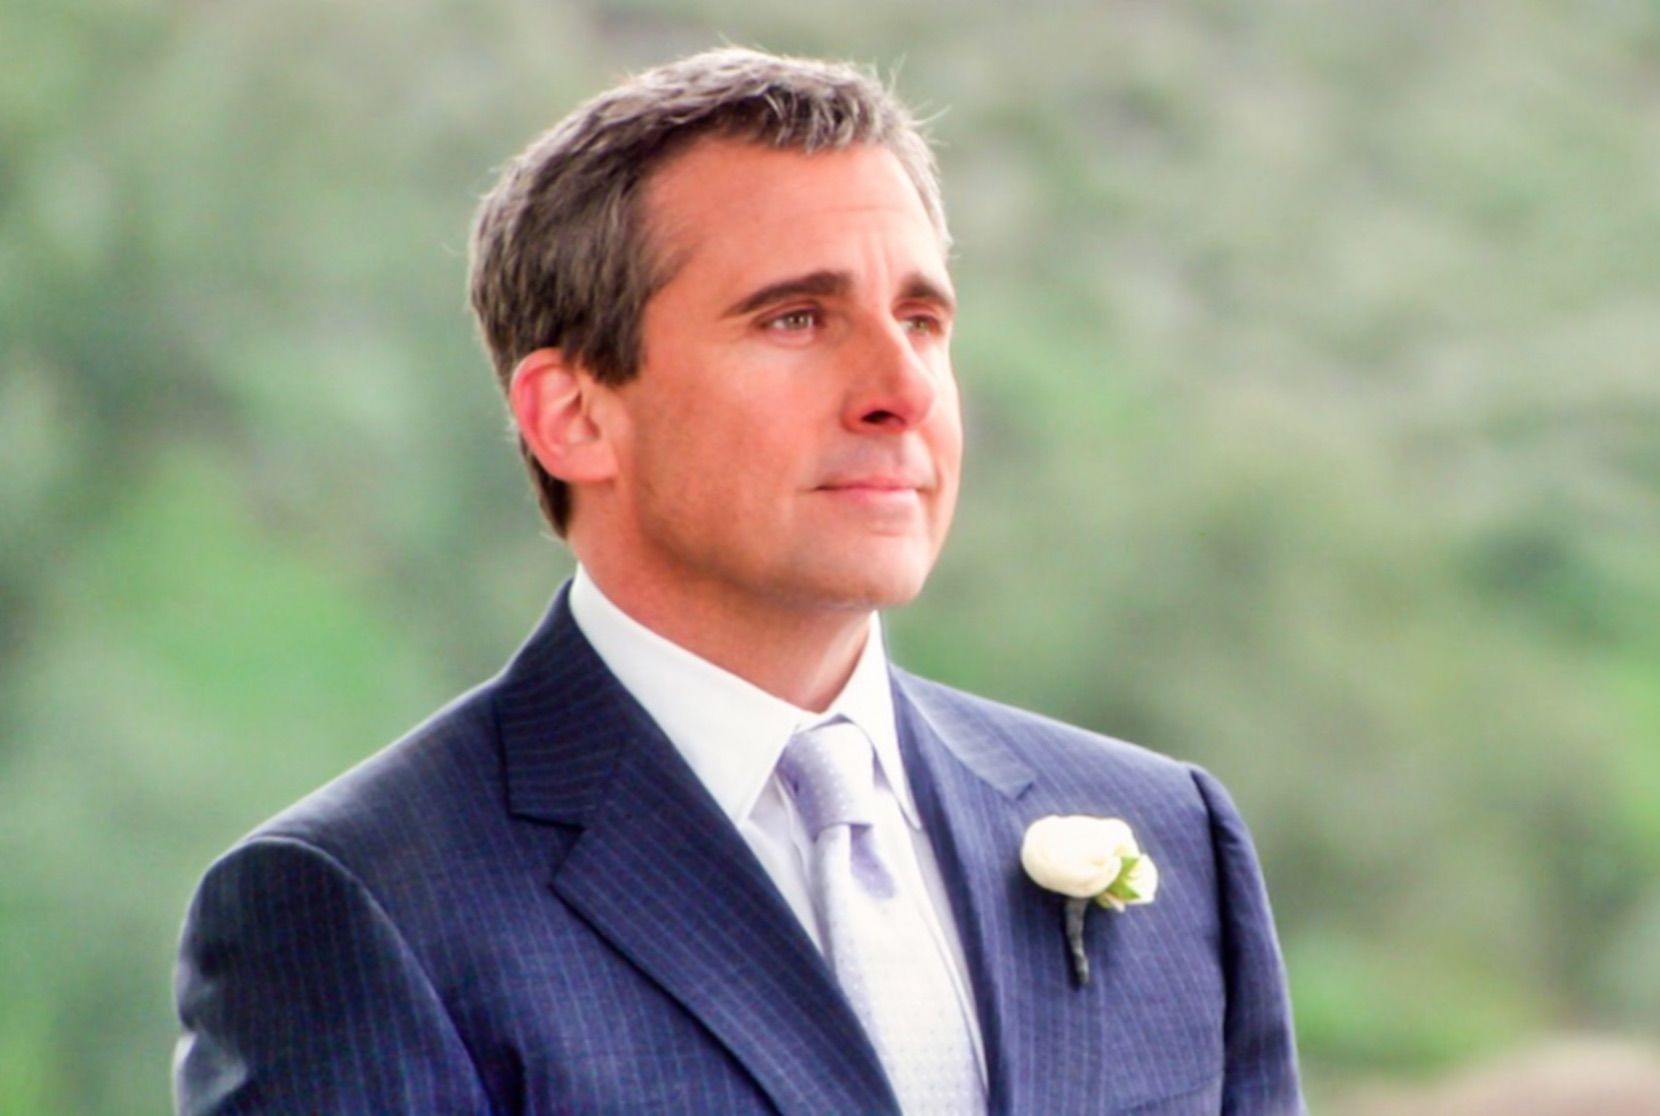 Steve Carell in The Office finale